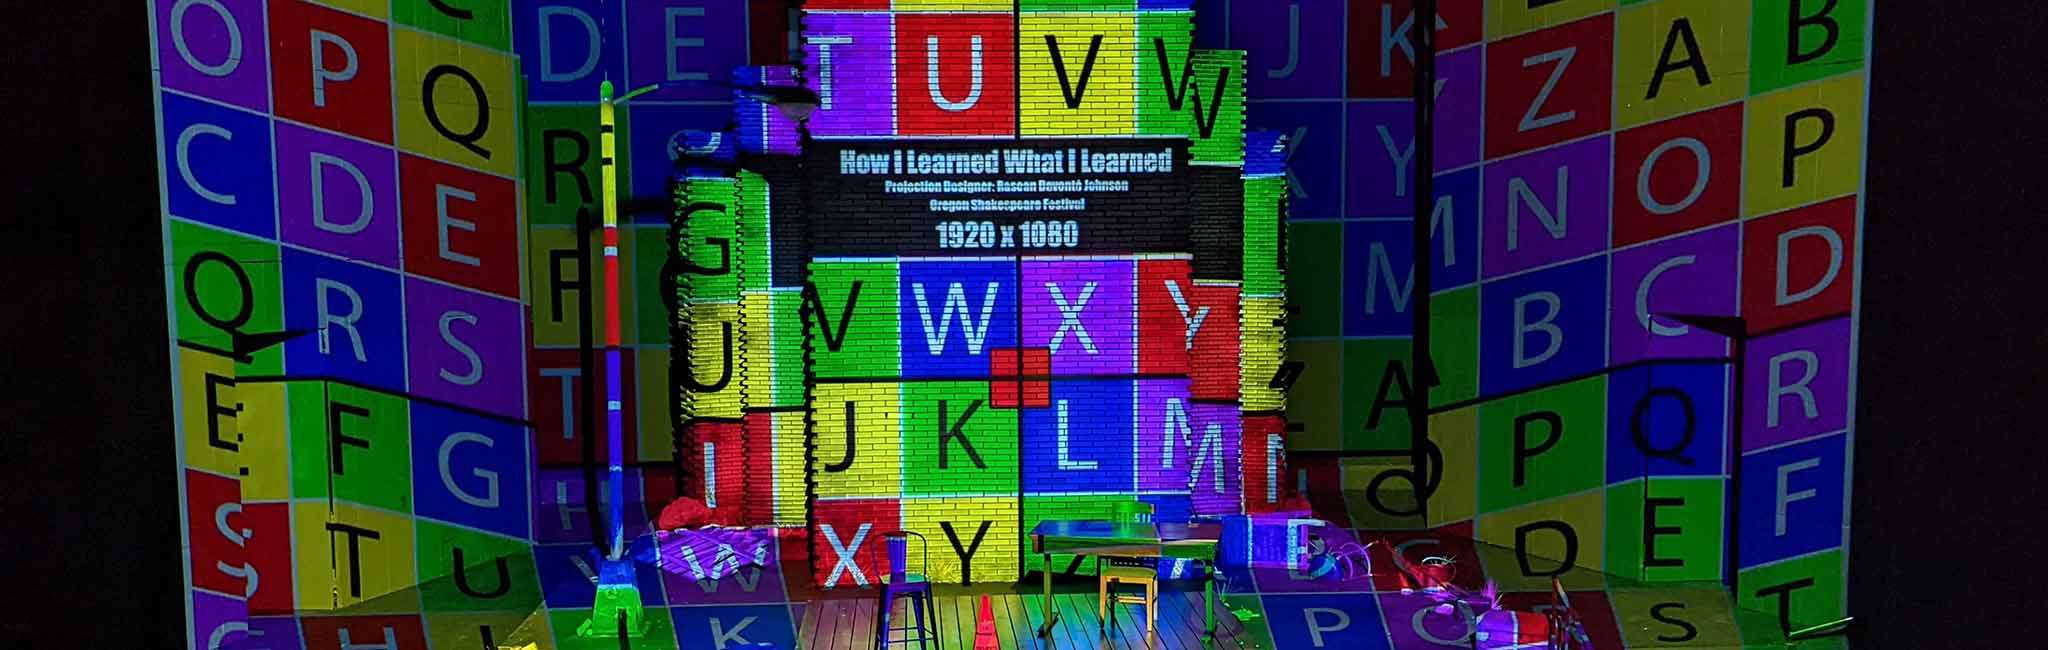 A colorful projection of letter tiles.